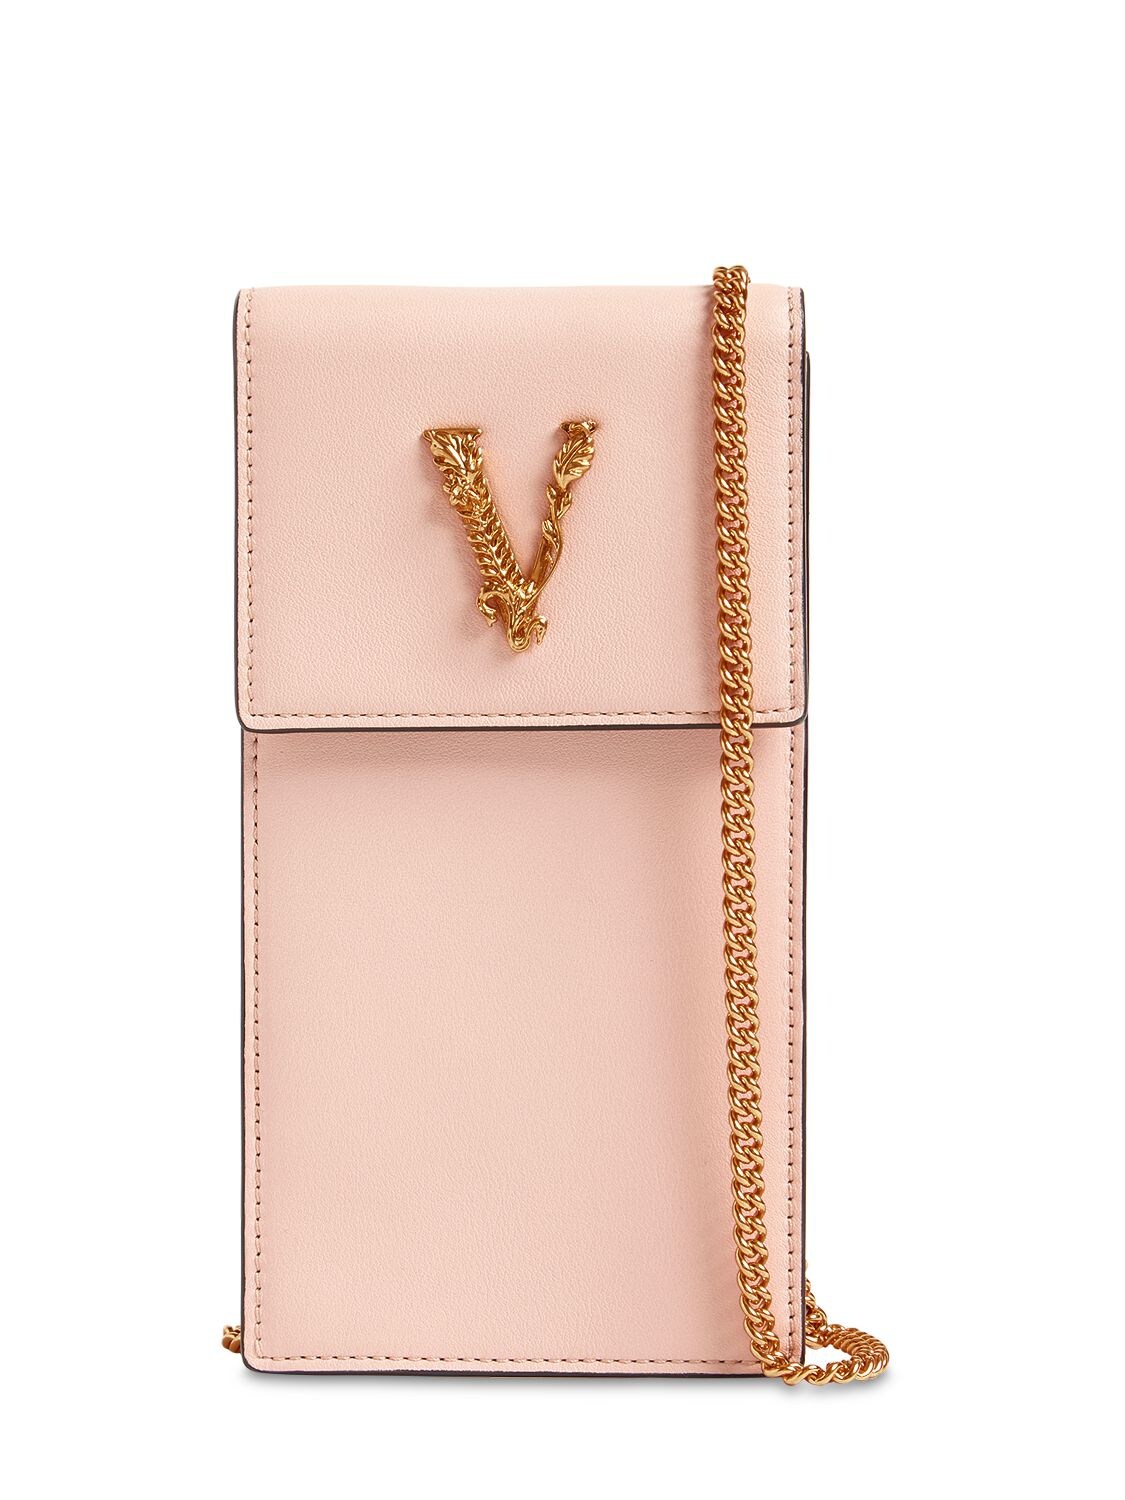 Versace Virtus Leather Phone Holder W/ Chain In Pink